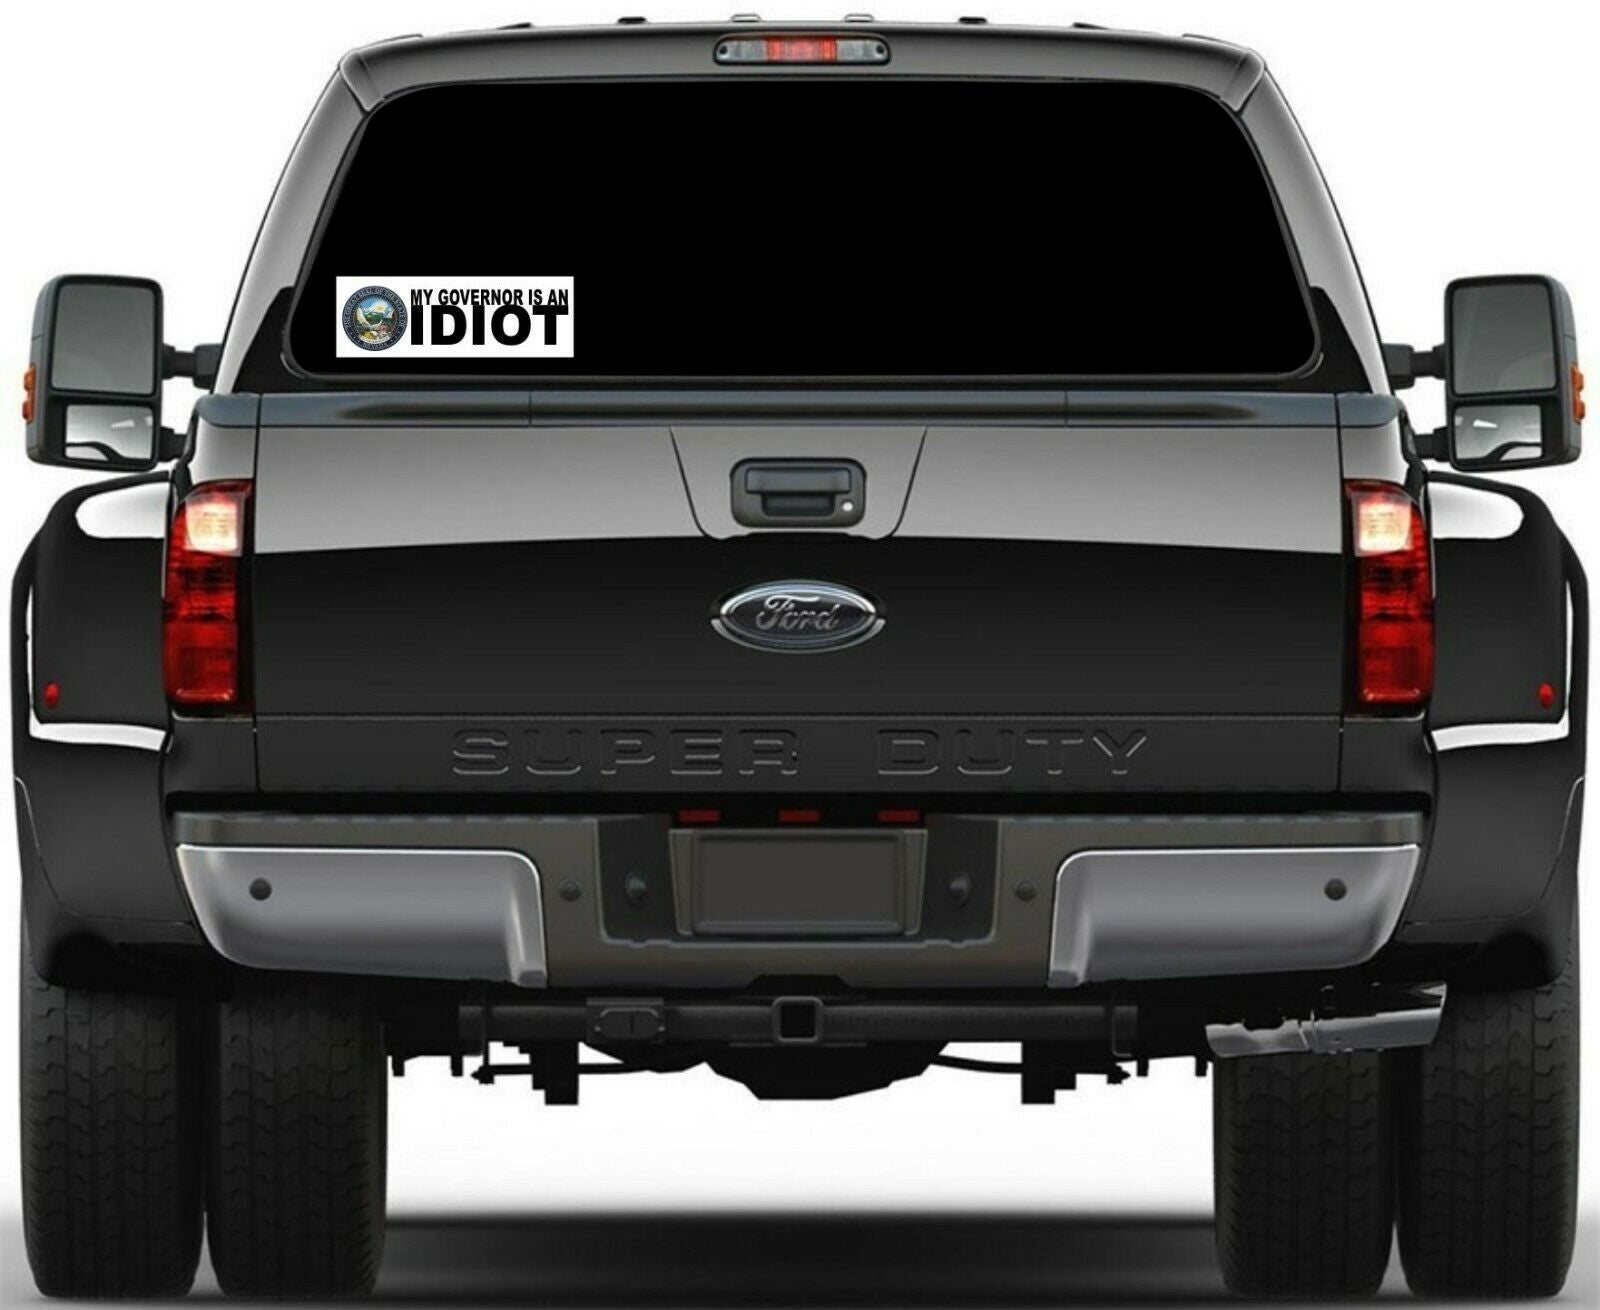 My governor is an idiot bumper sticker - Nevada Version - 8.8" x 3" Decal - Powercall Sirens LLC